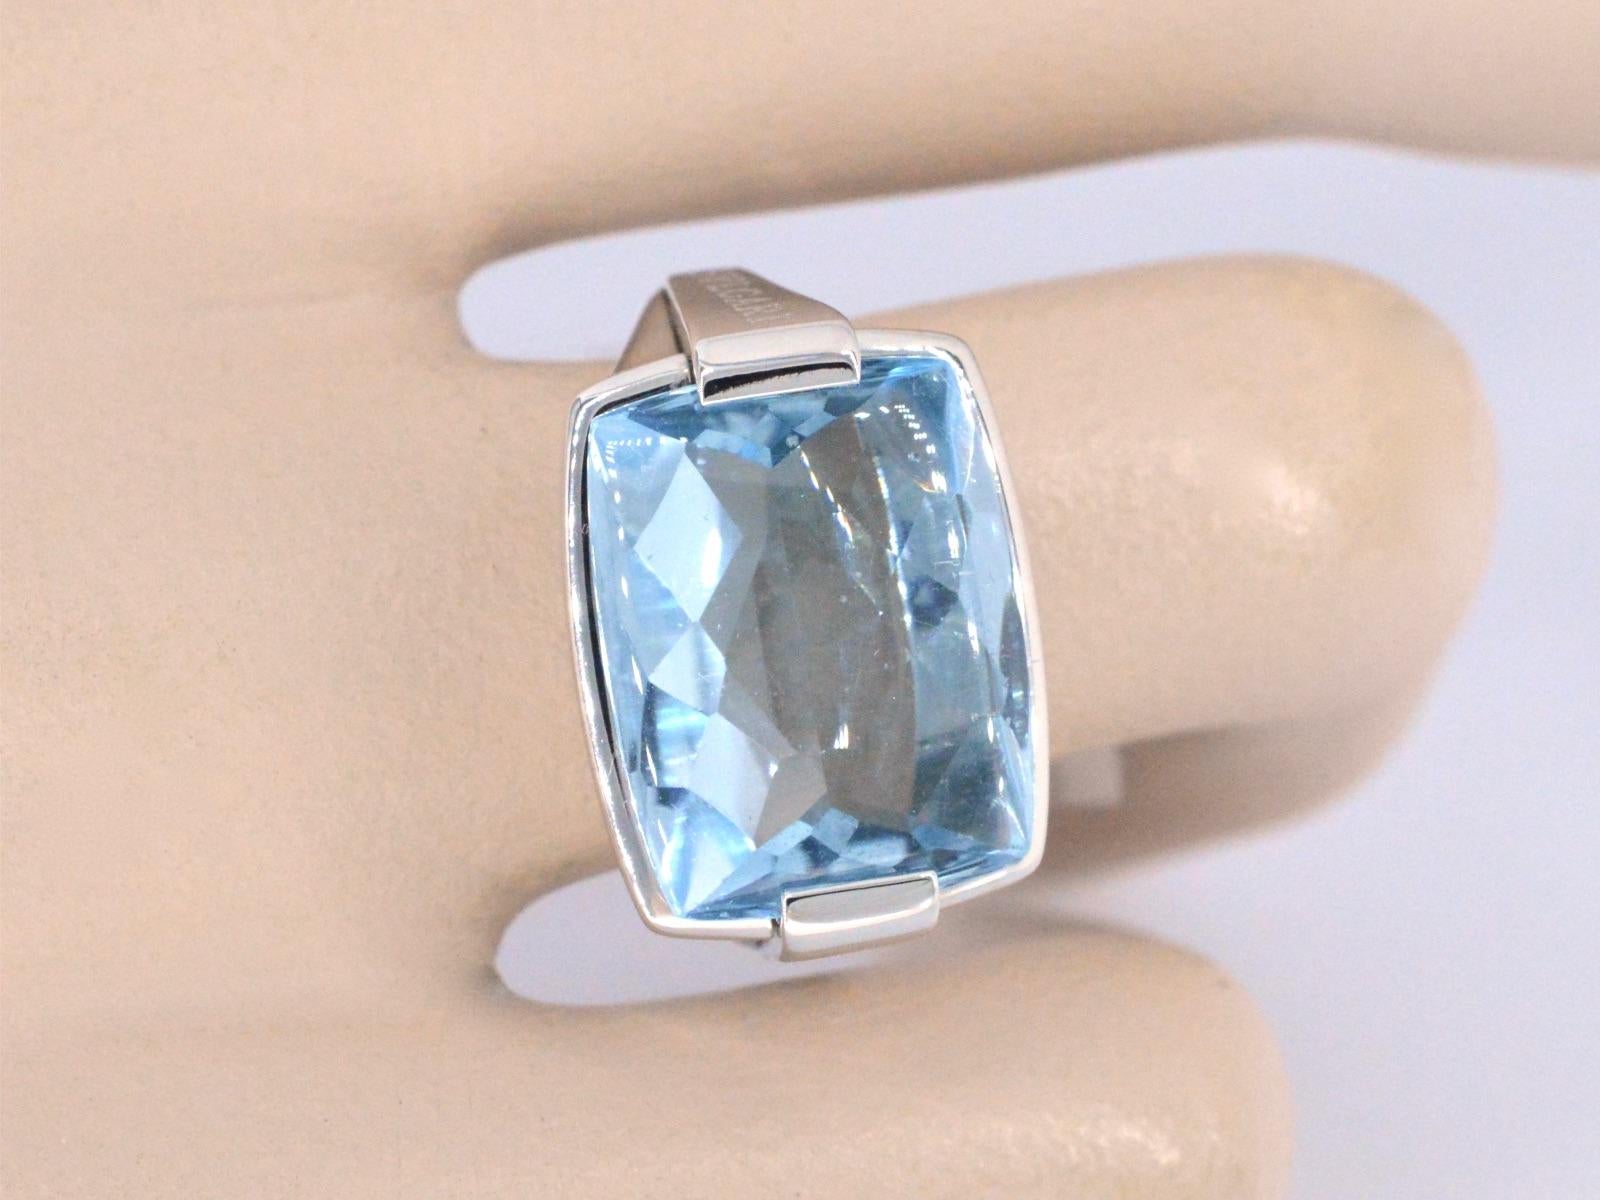 A stunning Bvlgari pyramid ring featuring a captivating blue topaz gemstone, measuring 12x15 mm. This exquisite cocktail ring, with its unique pyramid design, is a testament to Bvlgari's innovation in jewelry craftsmanship. Crafted from luxurious